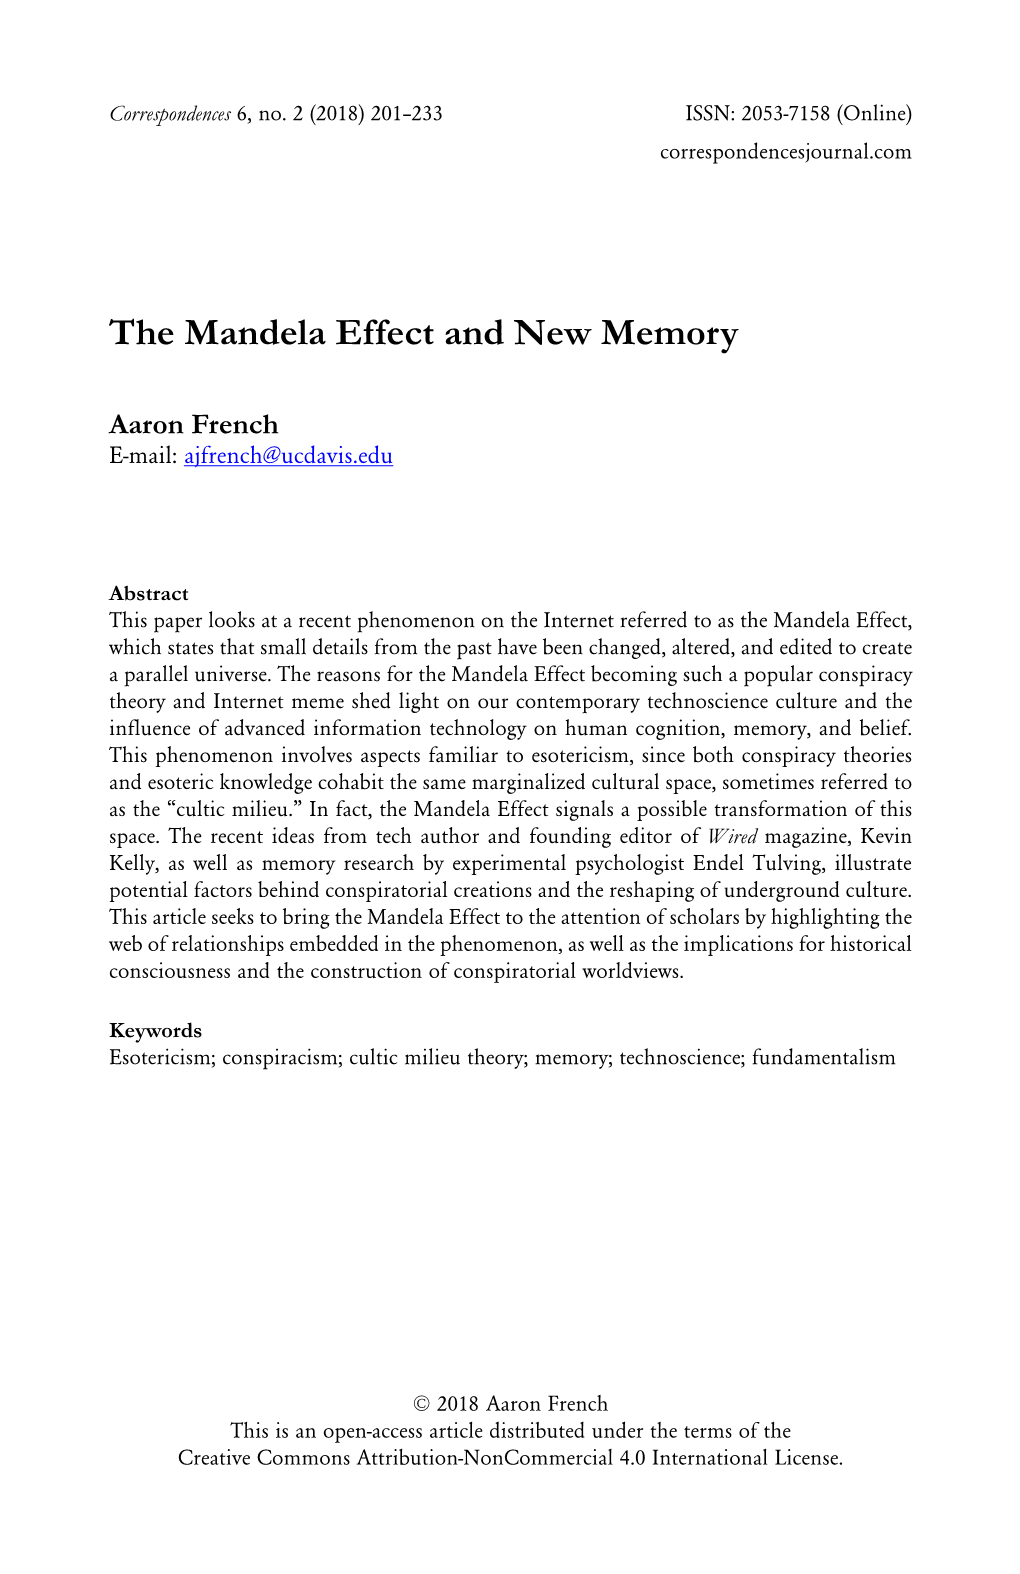 The Mandela Effect and New Memory